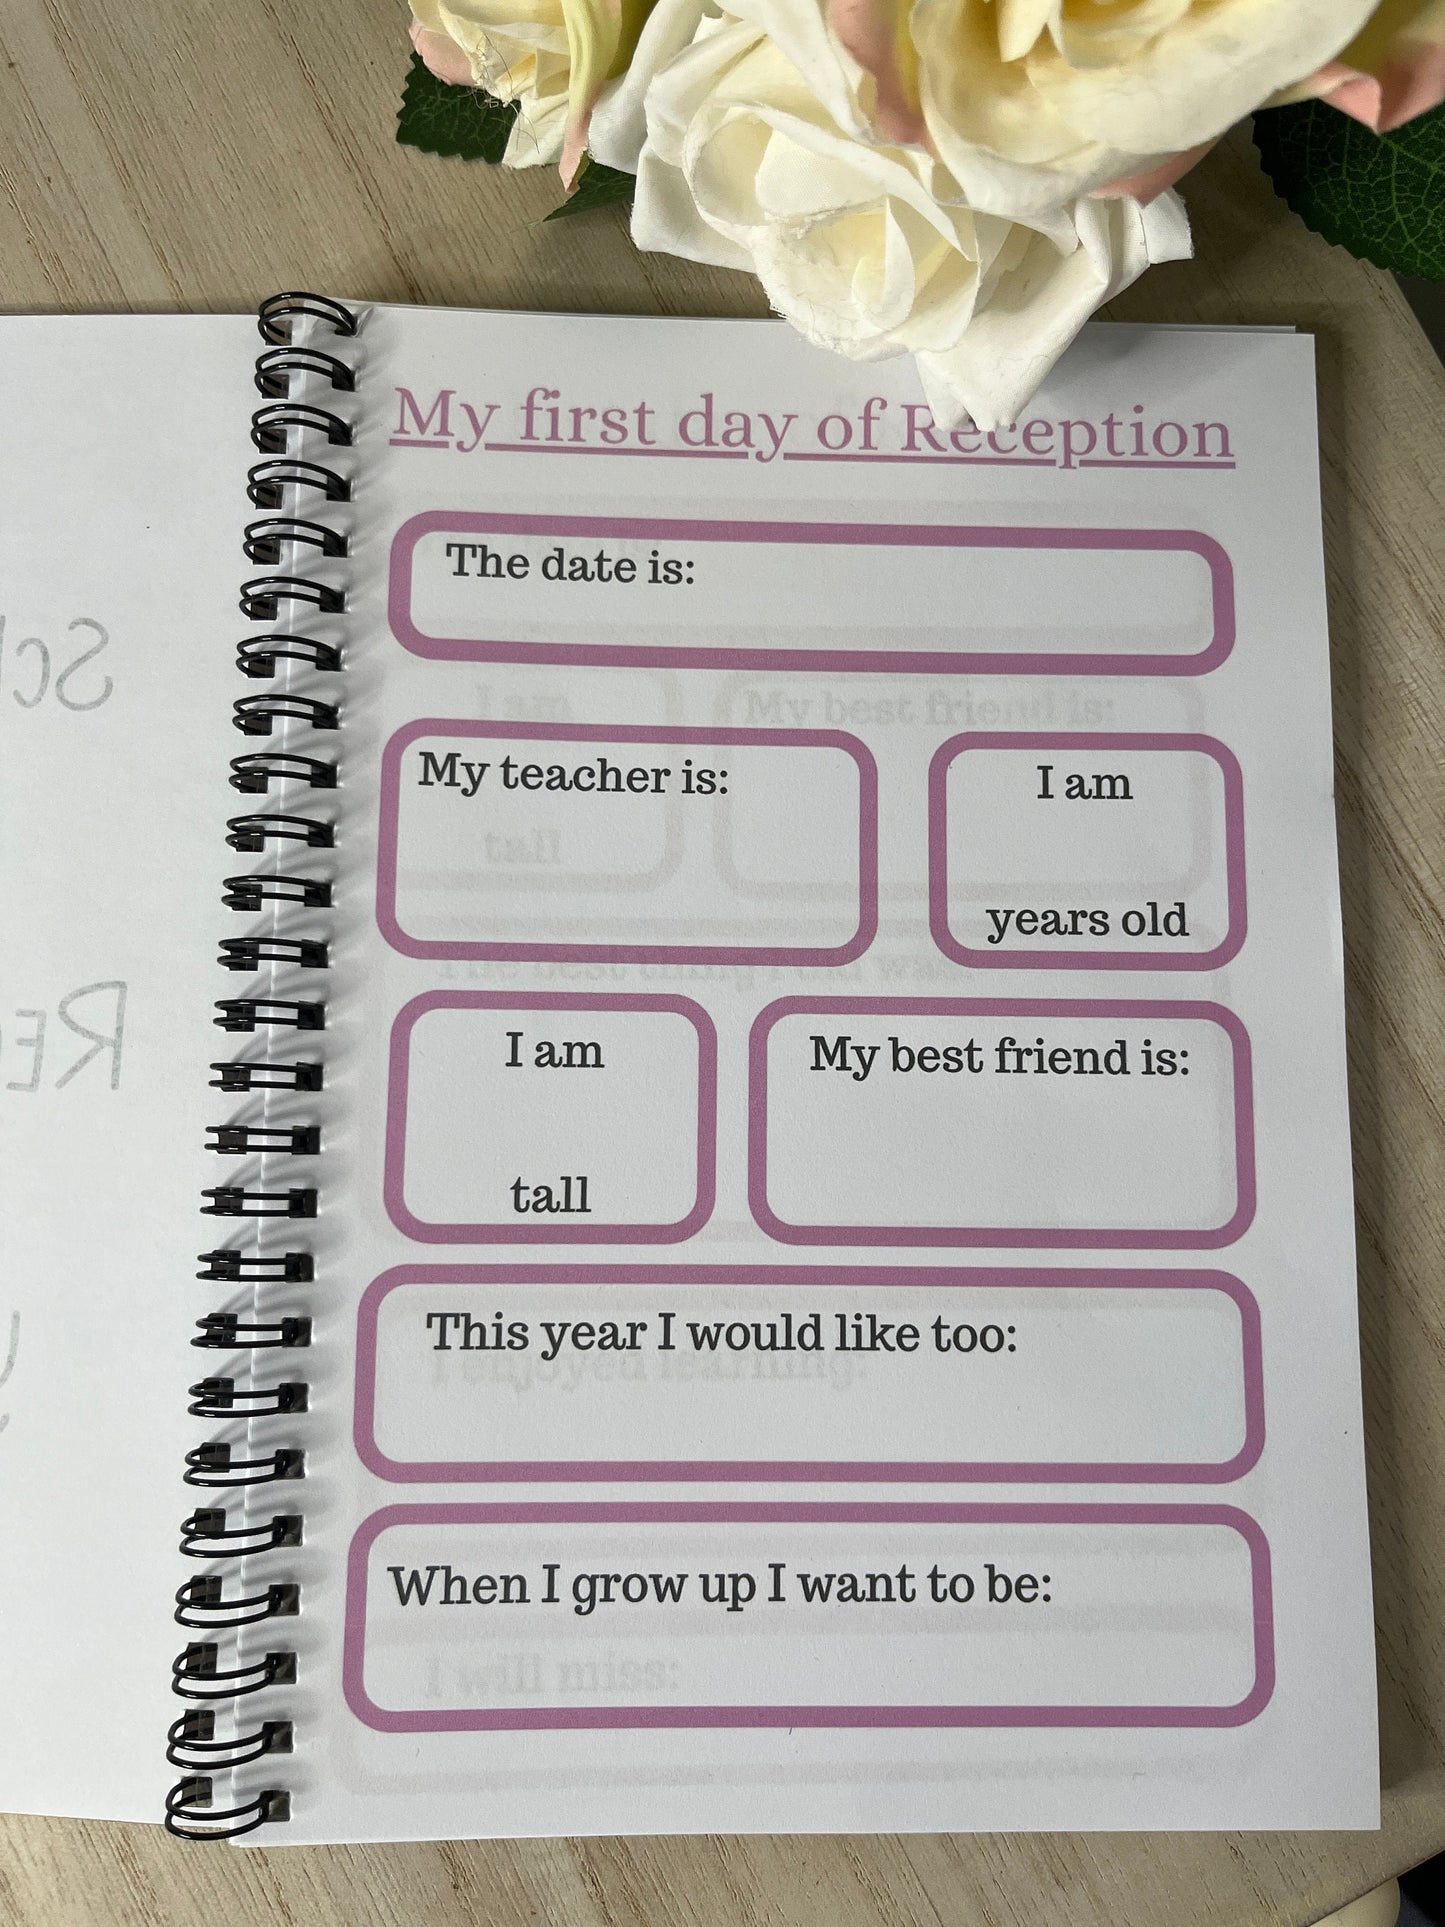 Personalised School Memory Book | My First Day at School | Starting School Gift | School Journal | Reception | Year 6